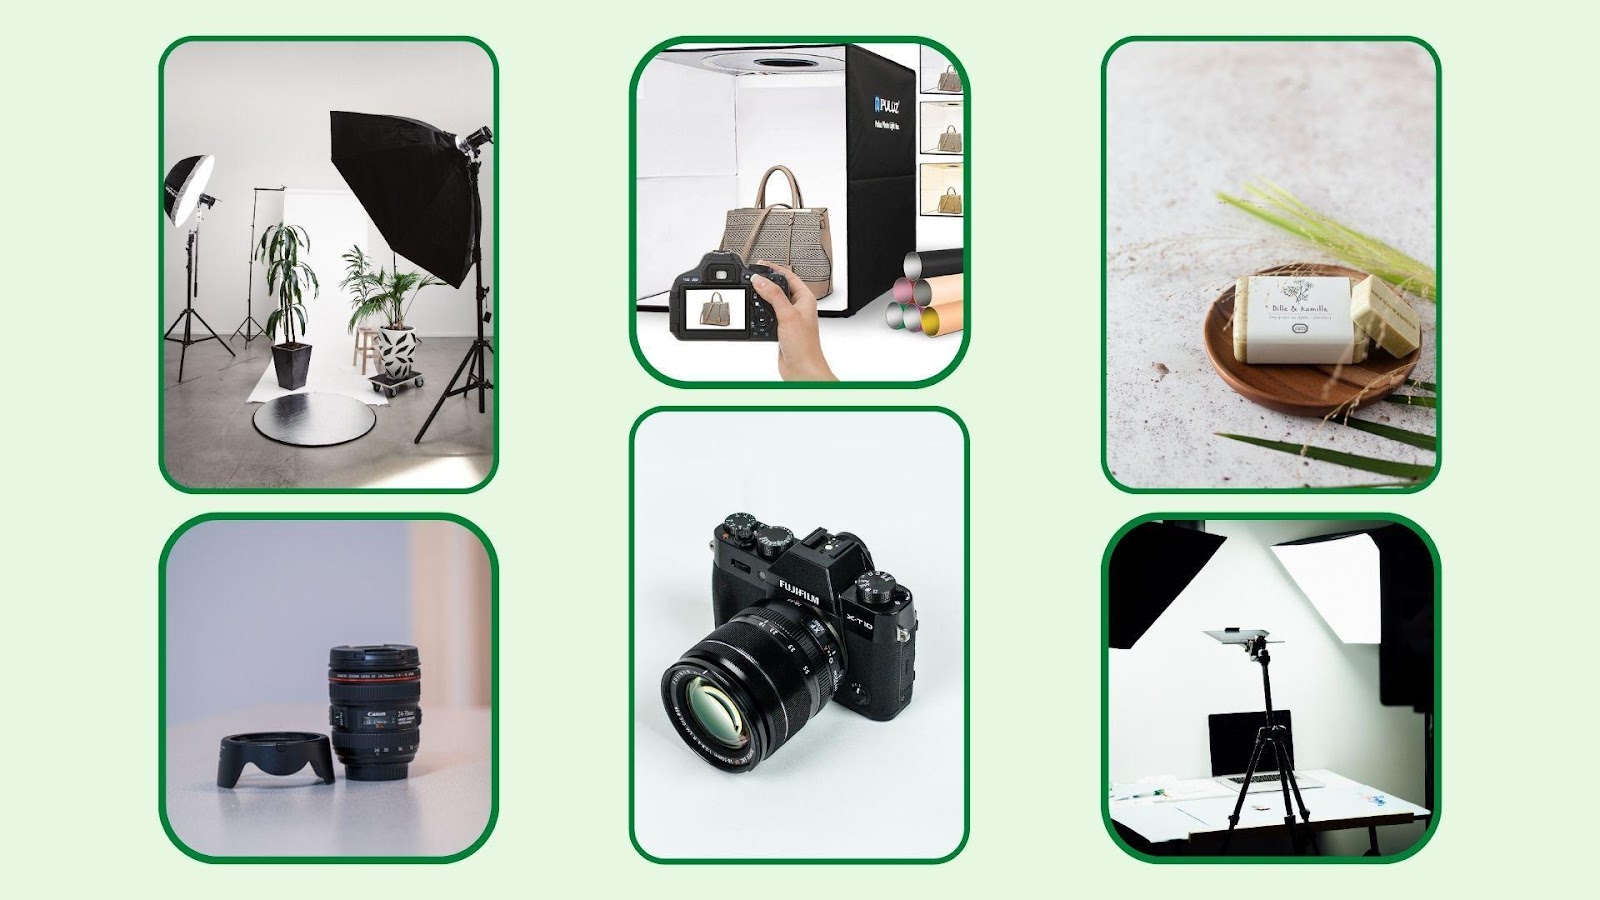 Photos of several pieces of equipment for photography, such as a lightbox and camera.